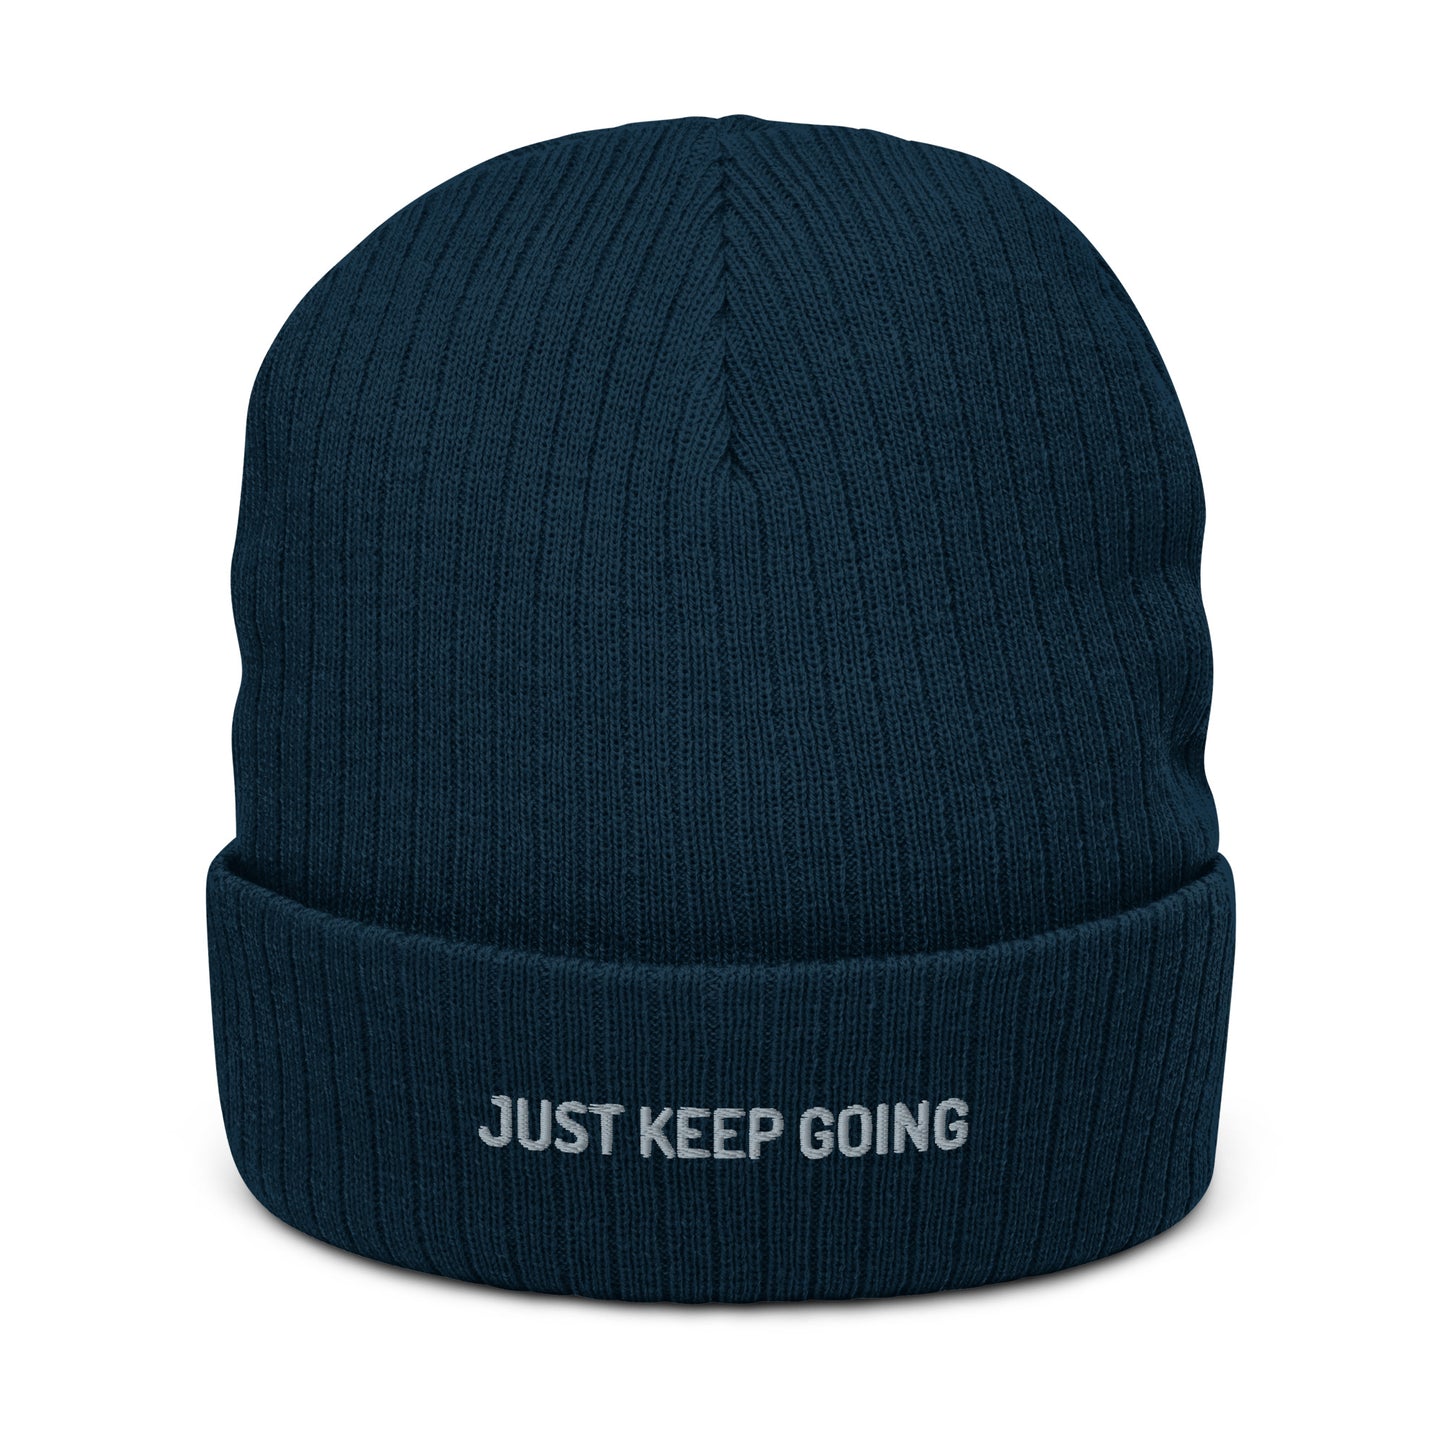 Ribbed "Just Keep Going" Beanie